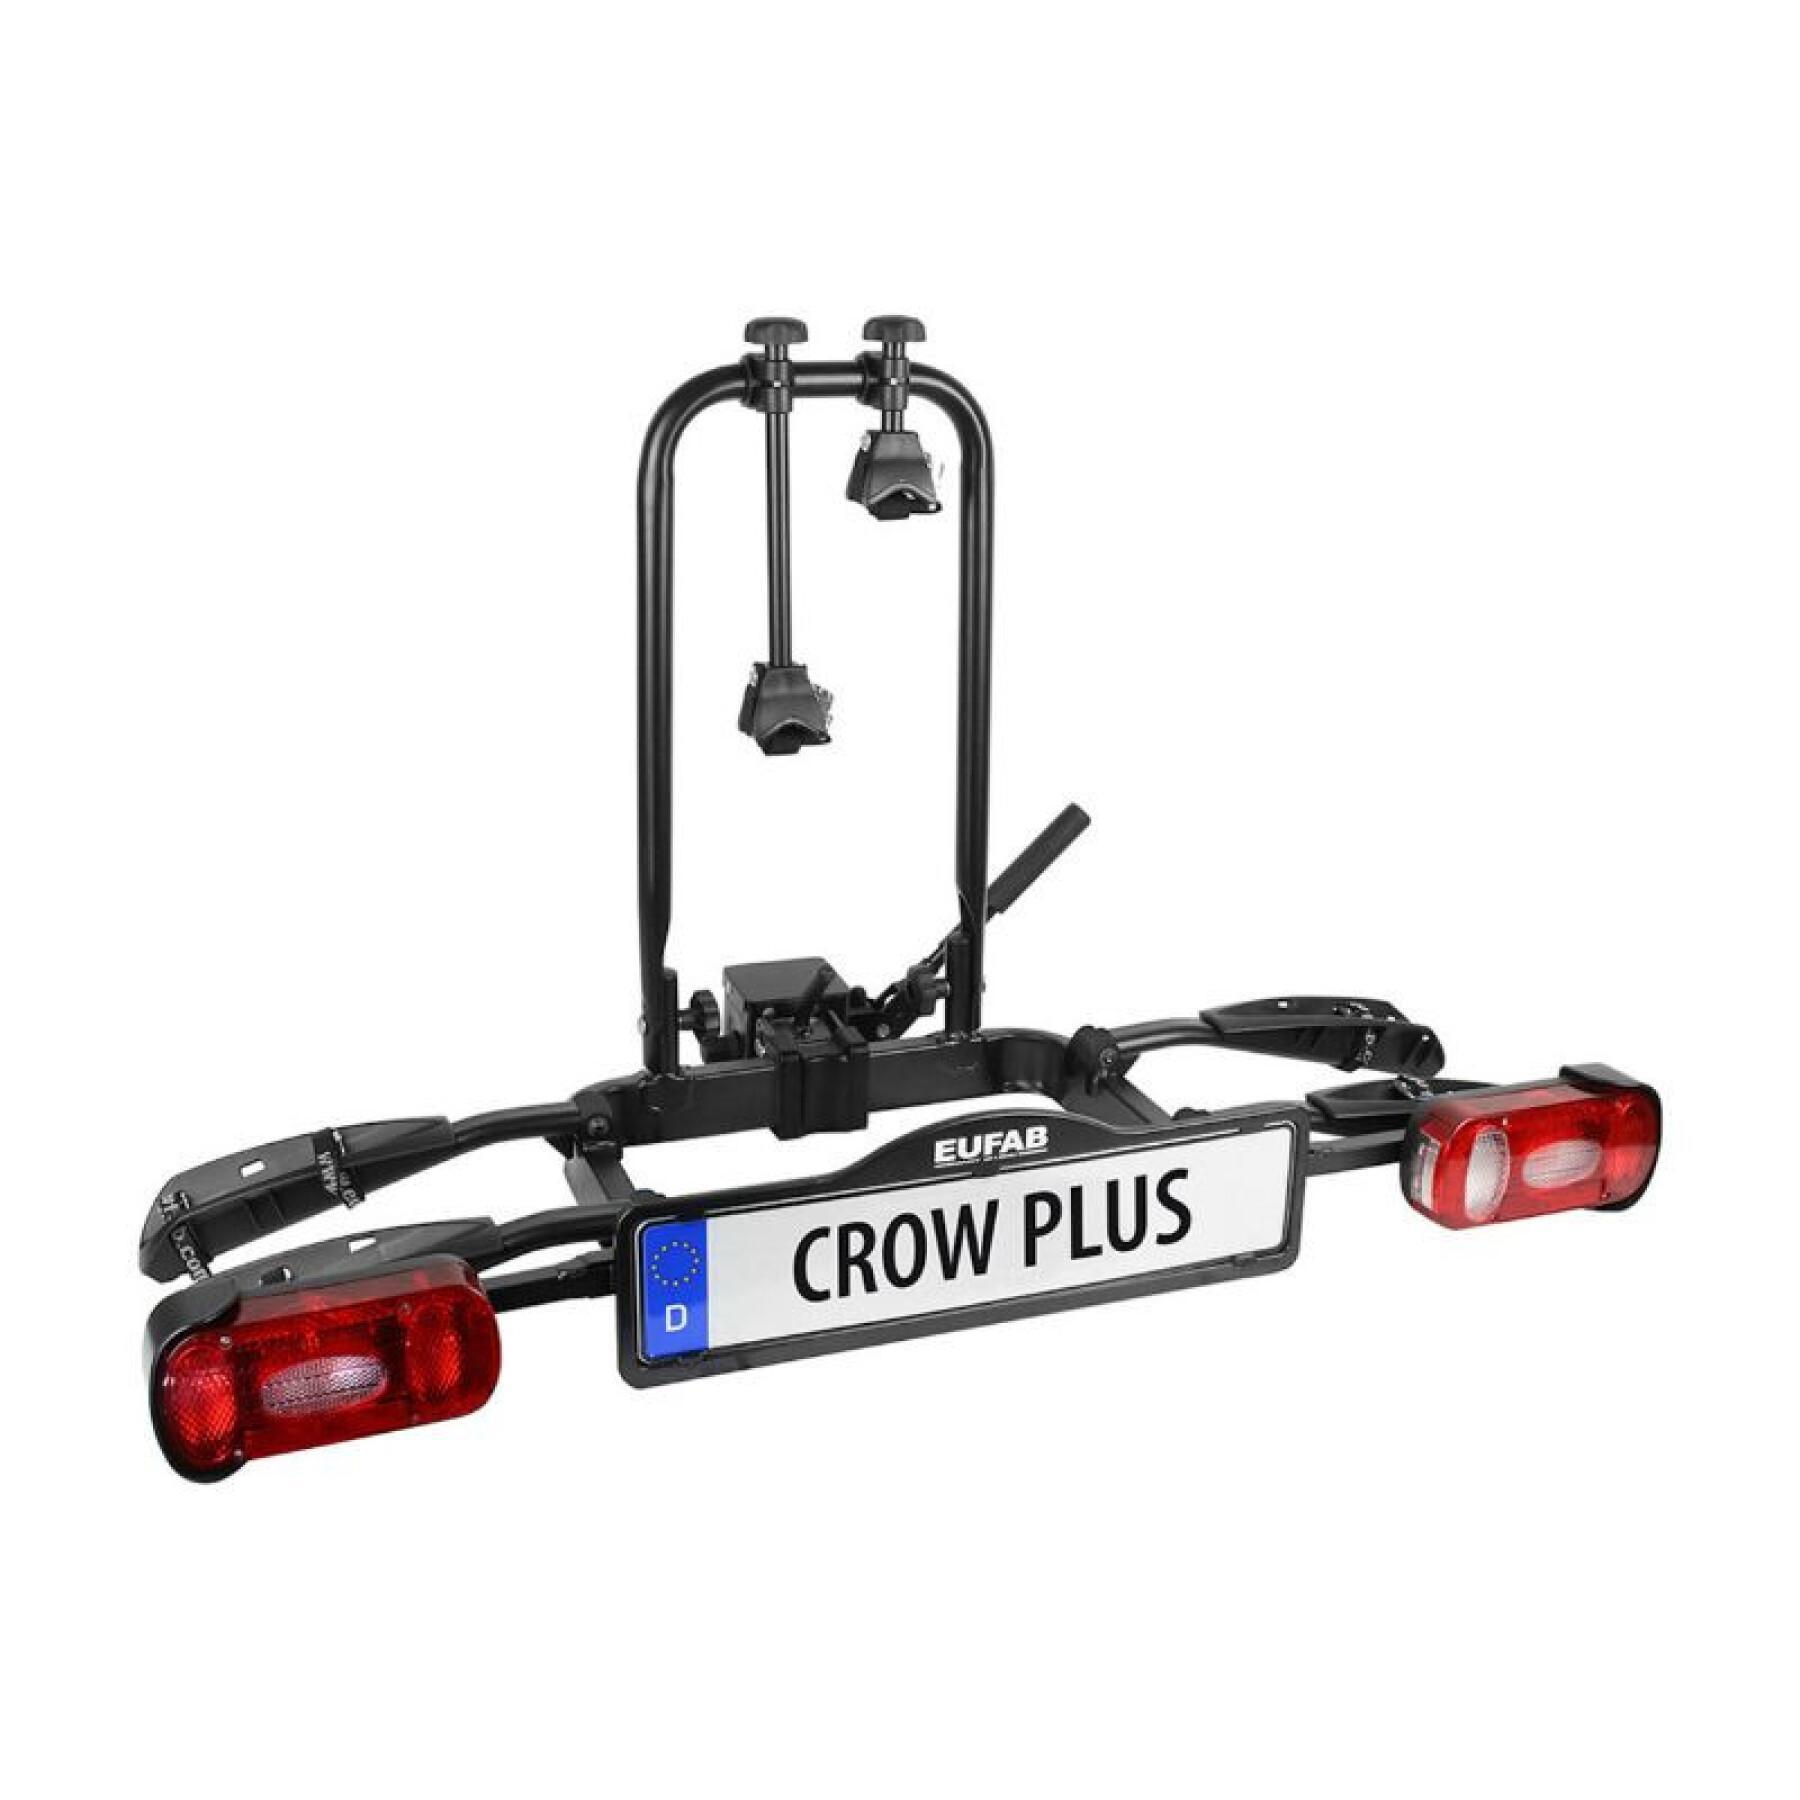 Bike carrier with tilting platform for 2 bikes rapide on the hitch - possibility of extension for 3rd bike P2R Eufab Crow Plus 50 kgs